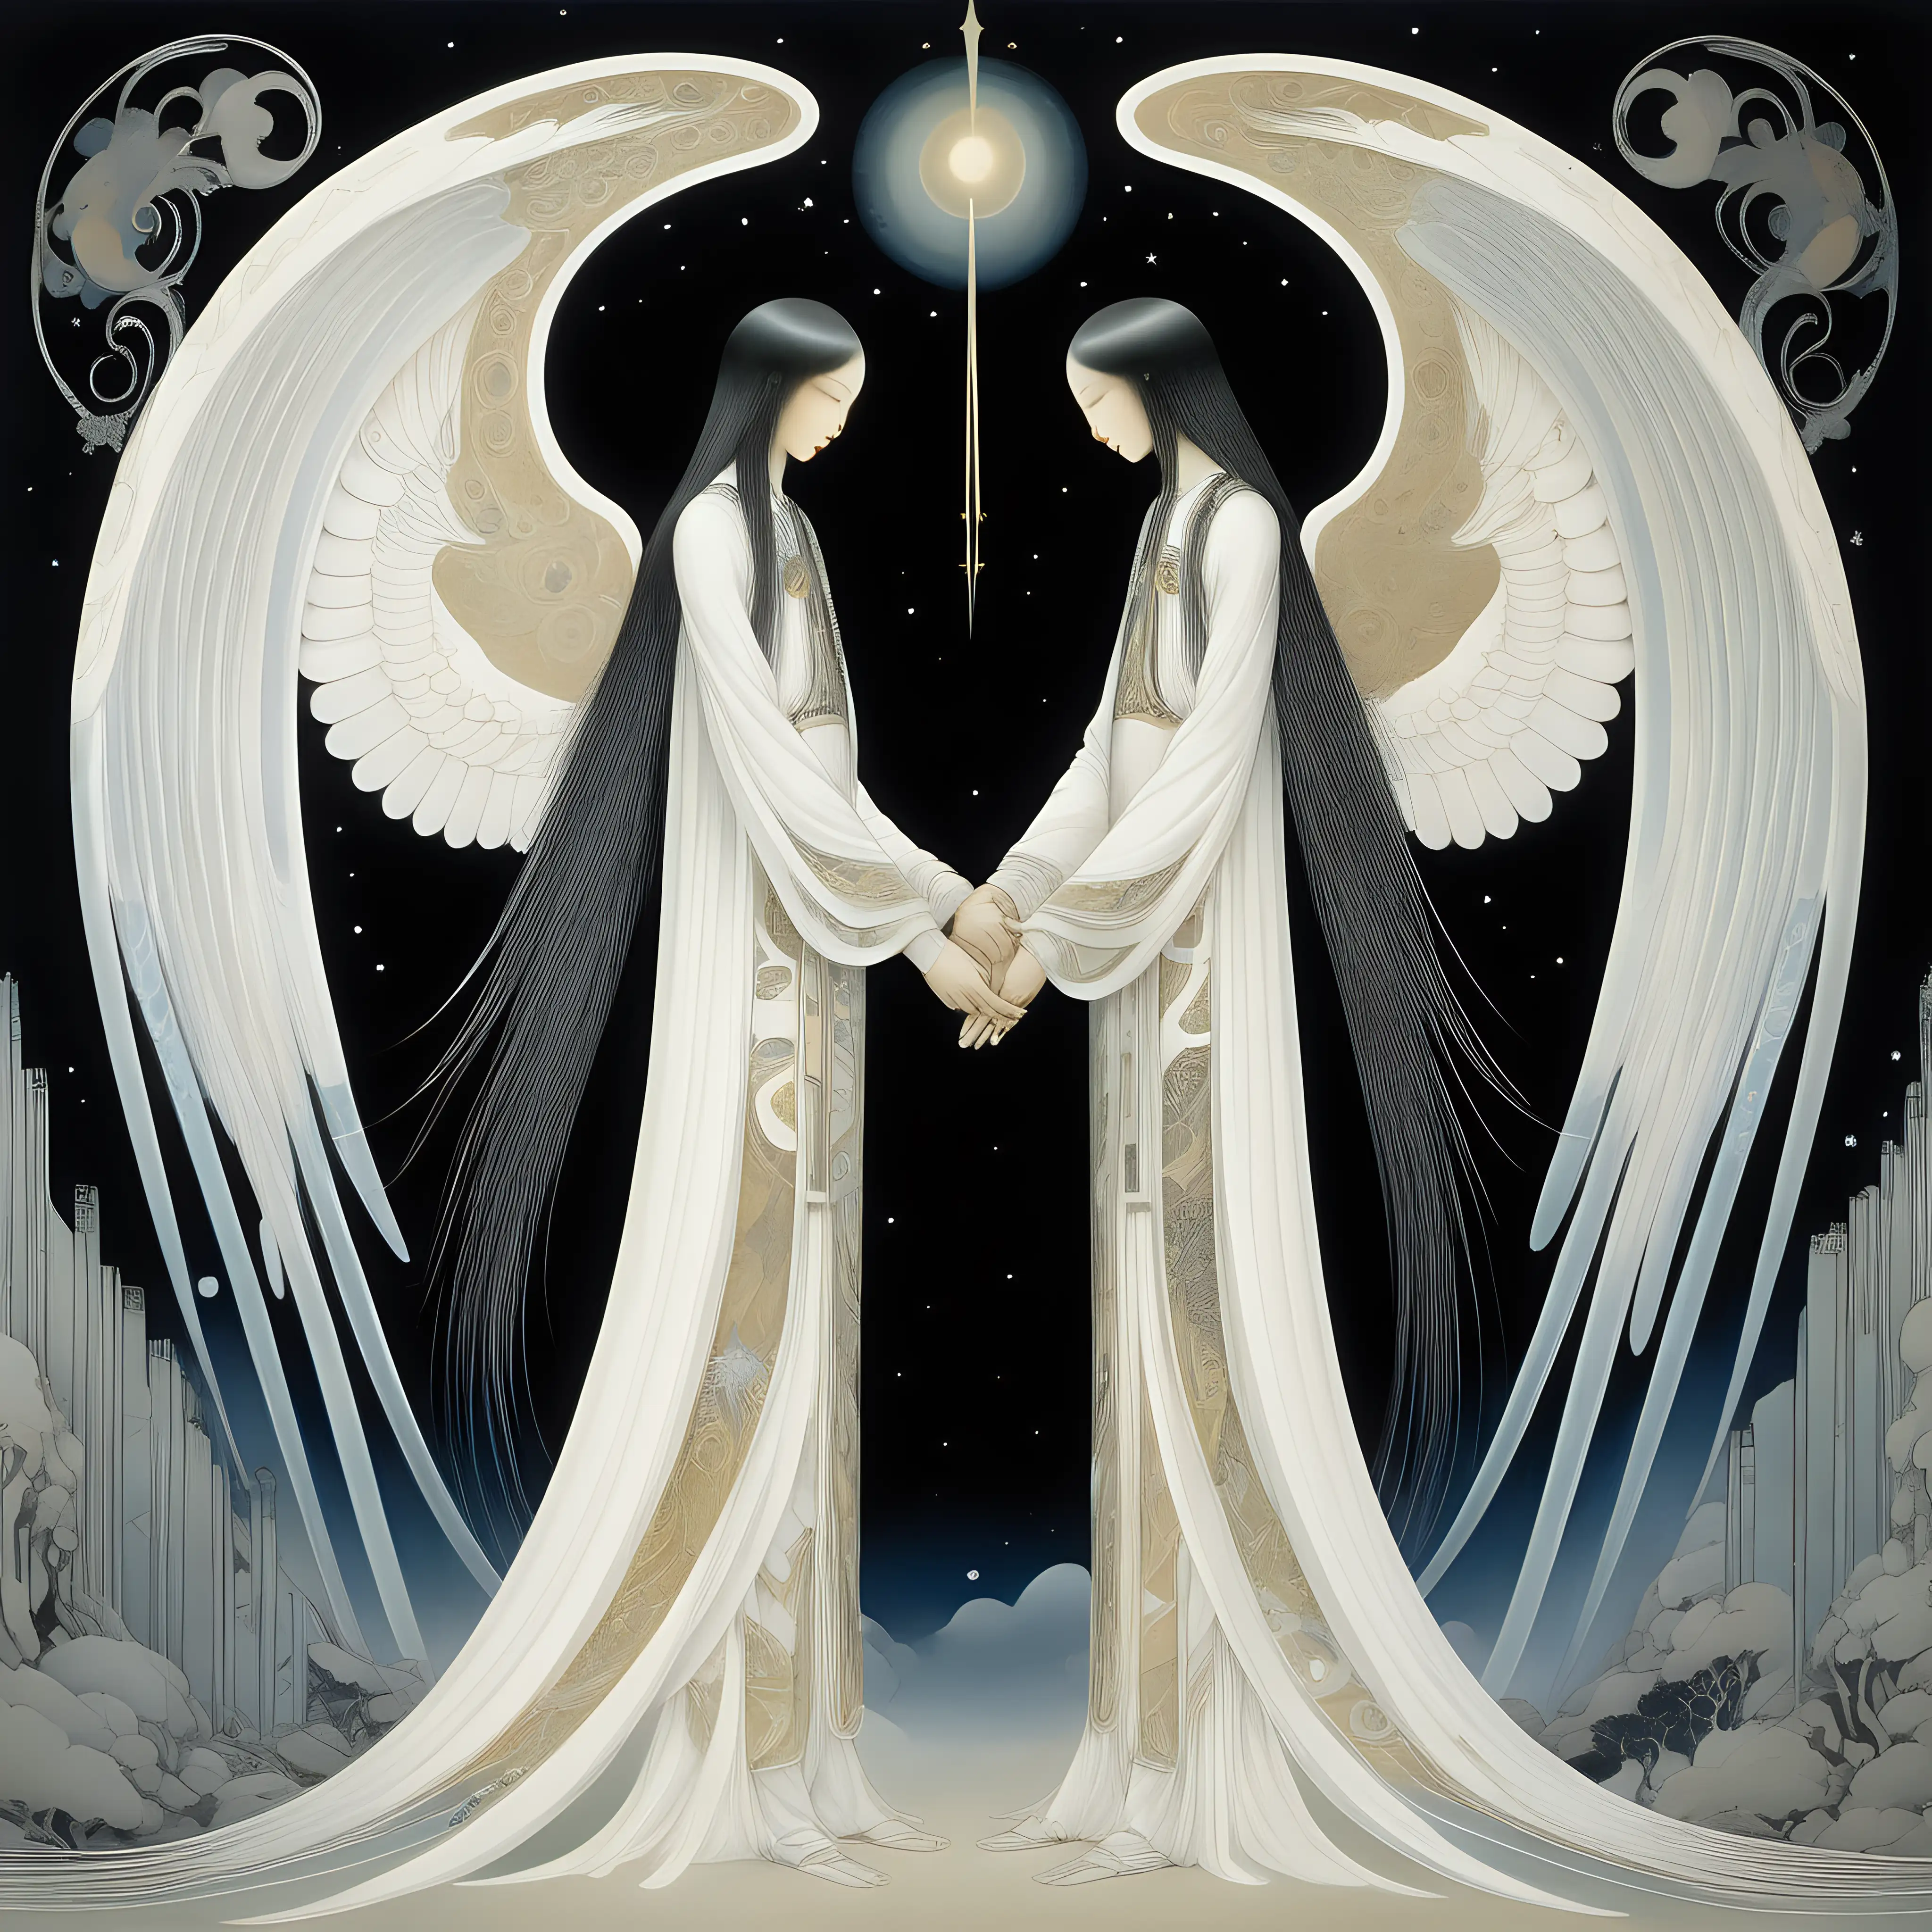 futuristic painting in kay nielsen style of two angels of asian race, male and female with long hair, holding hands